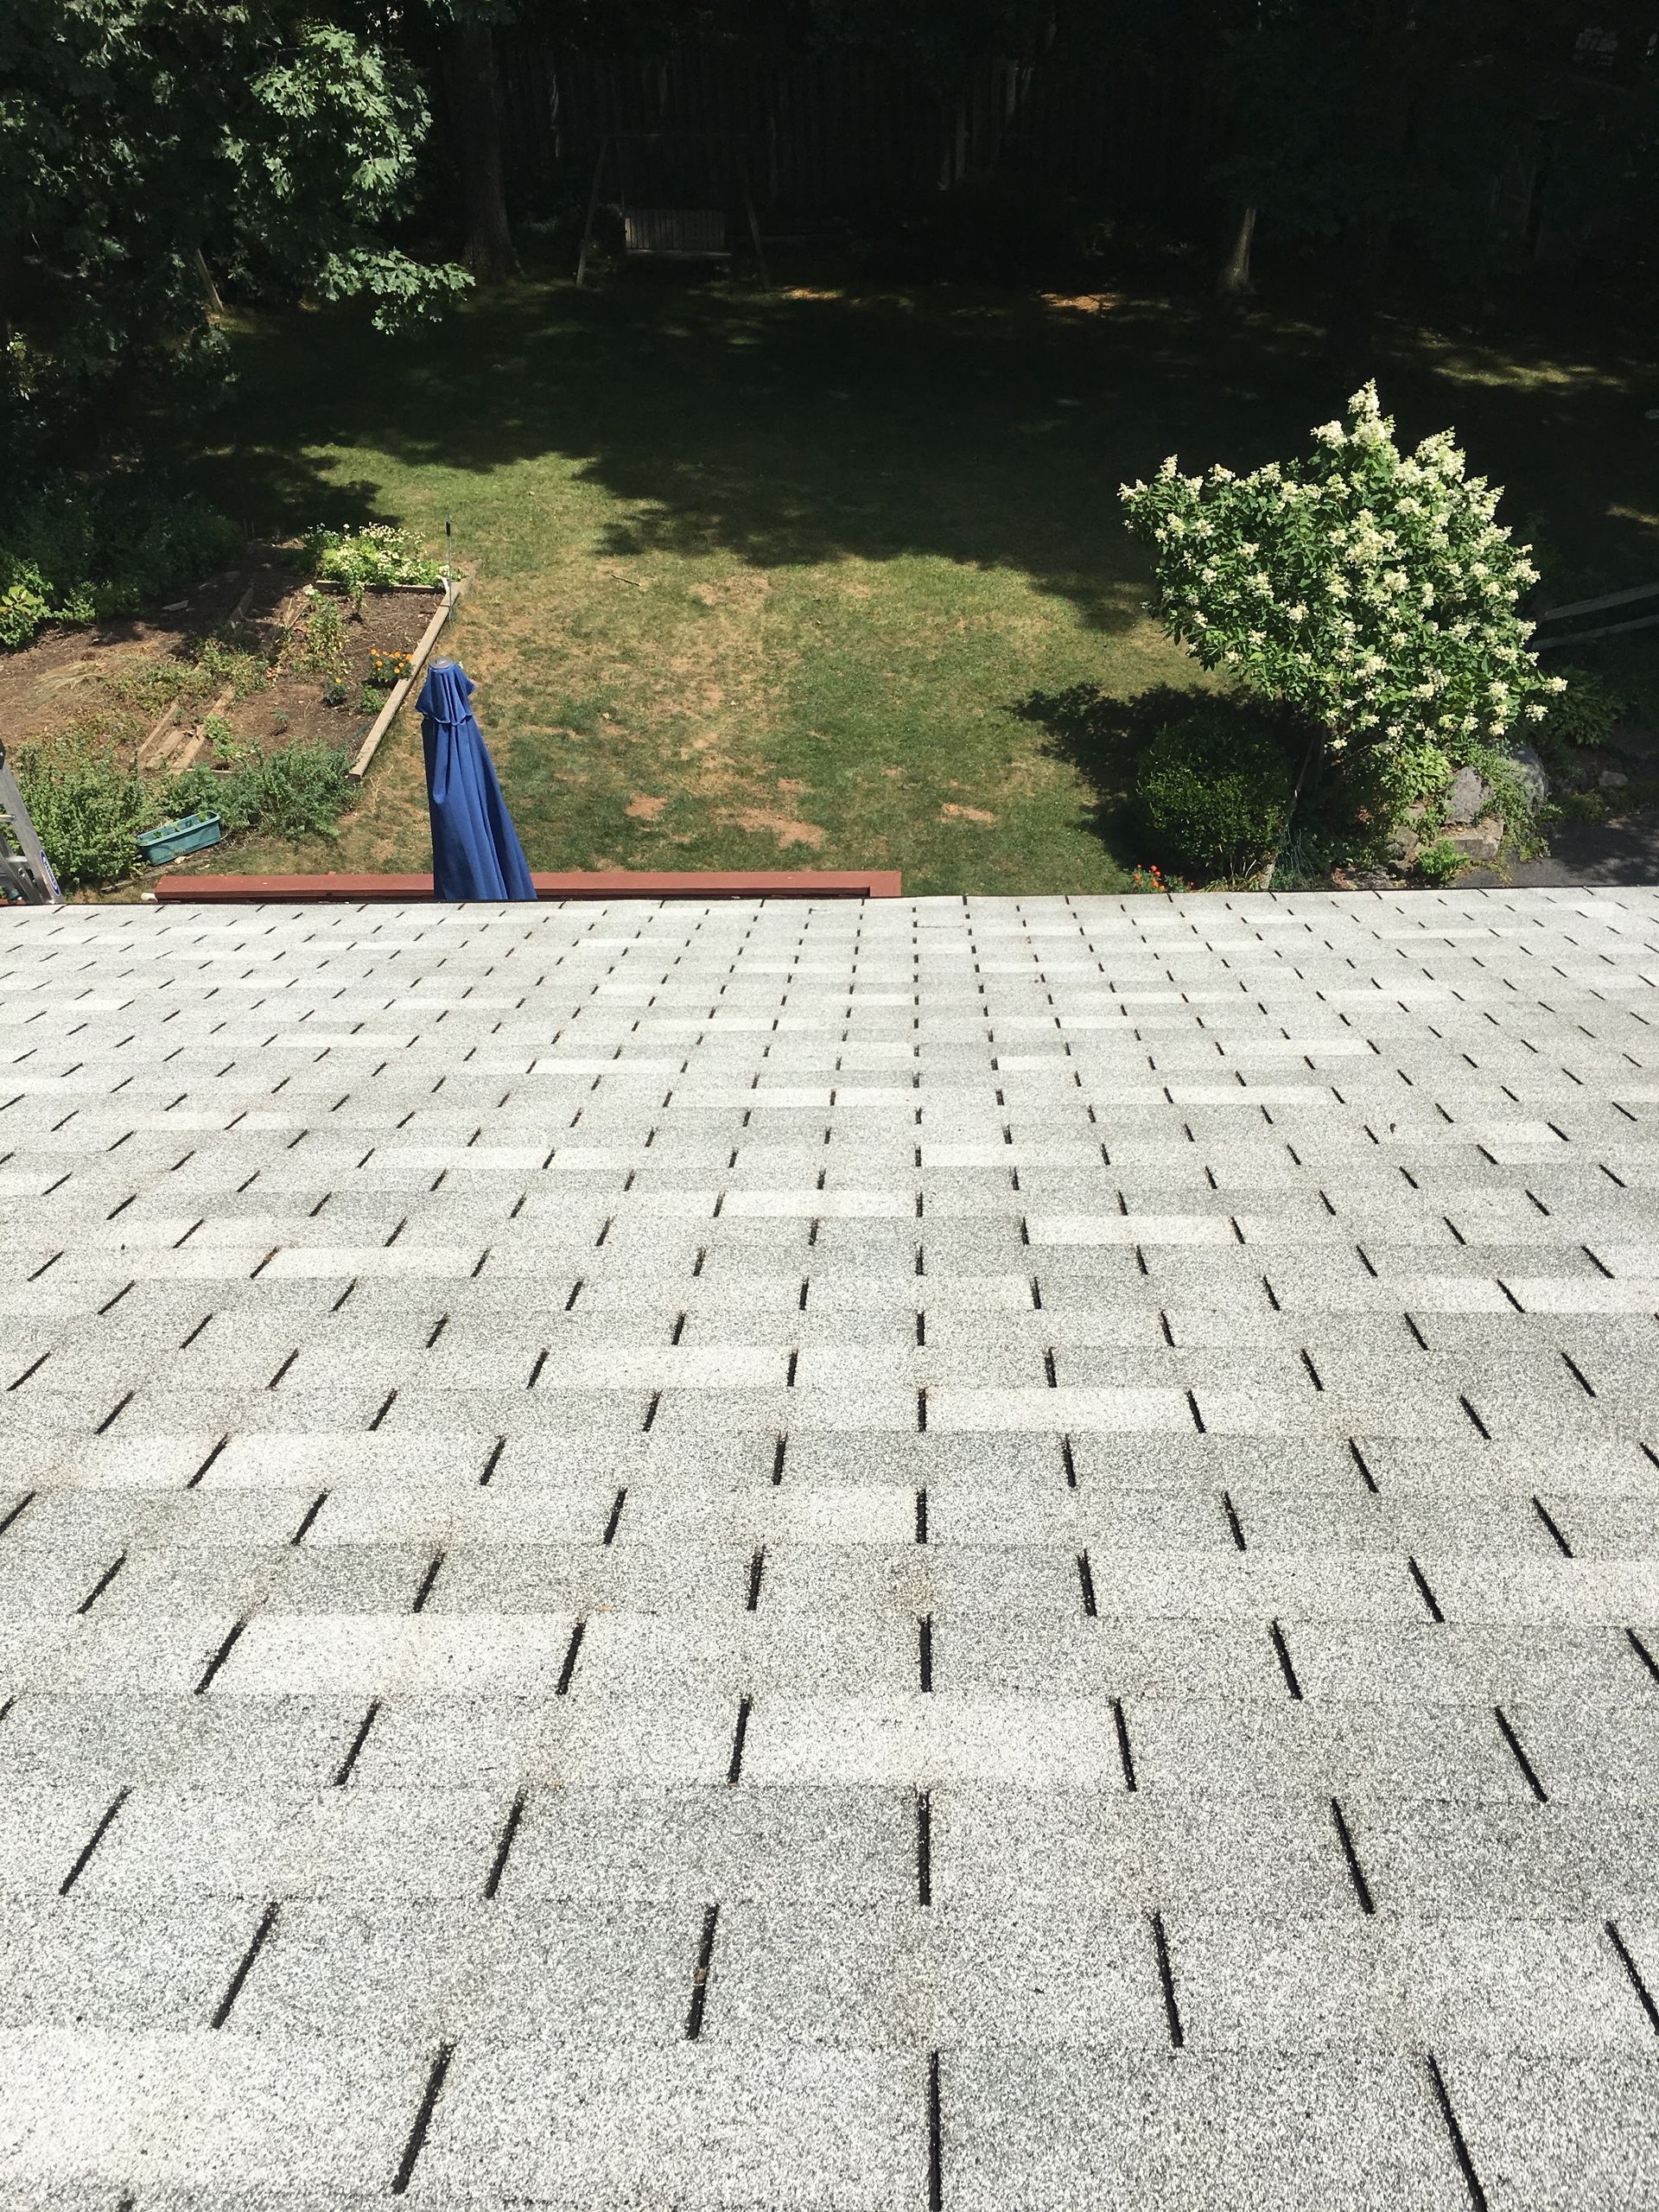 Cleaning Roof With Pressure Washer